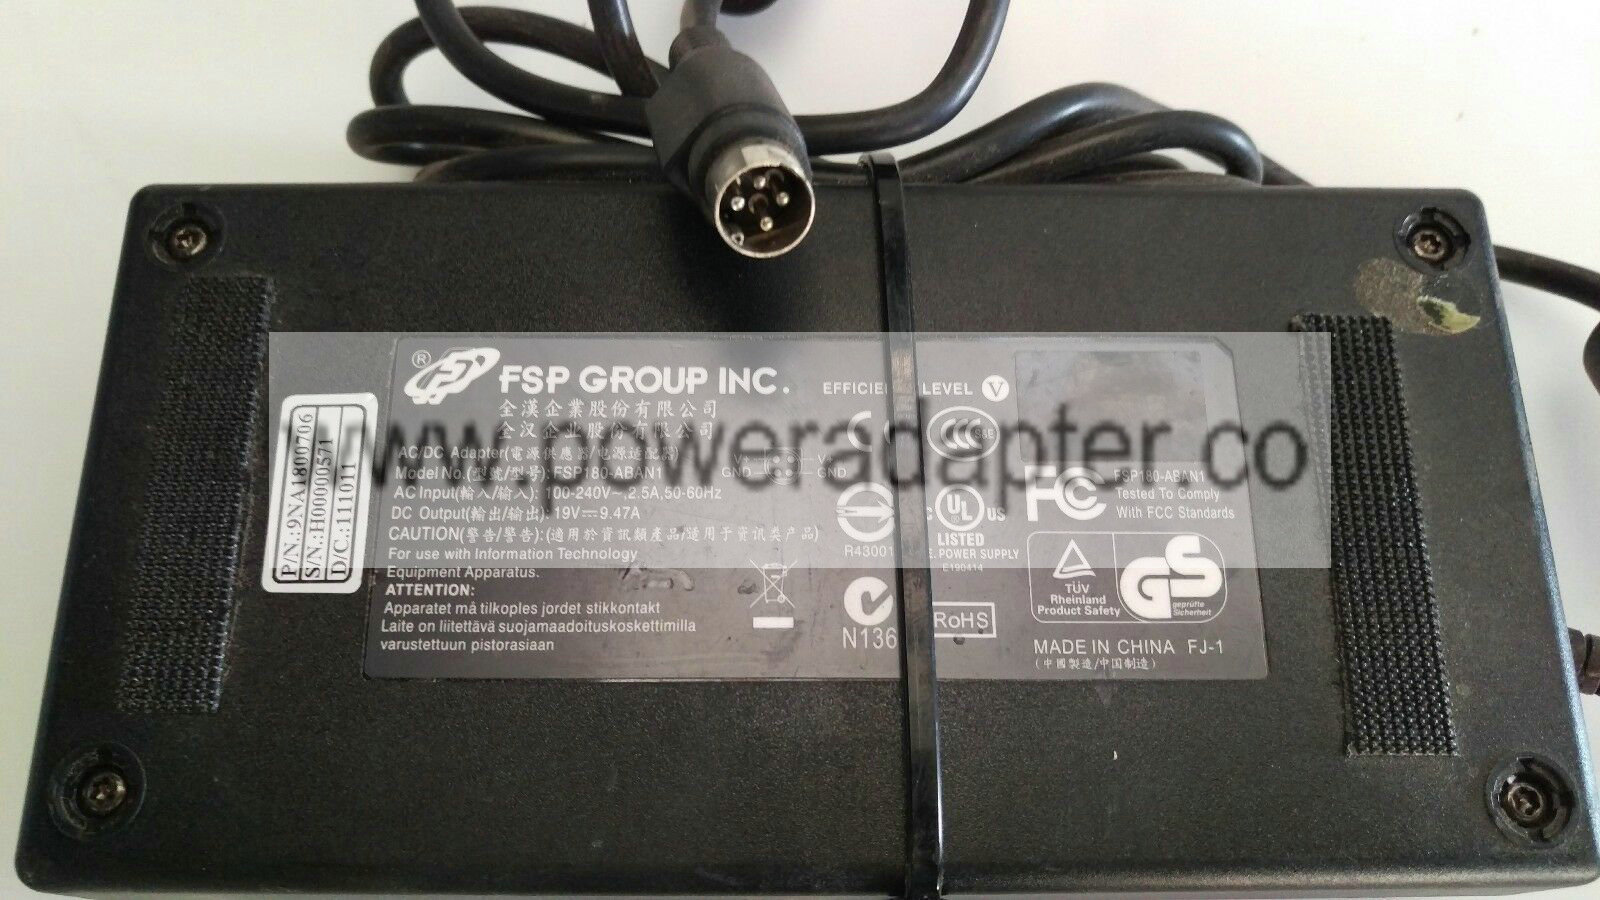 FSP GROUP FSP180-ABAN1 19V 9.47A AC/DC Power Adapter For PAR M7125-01 9NA1800706 UP FOR SALE IS A FSP GROUP FSP180-AB